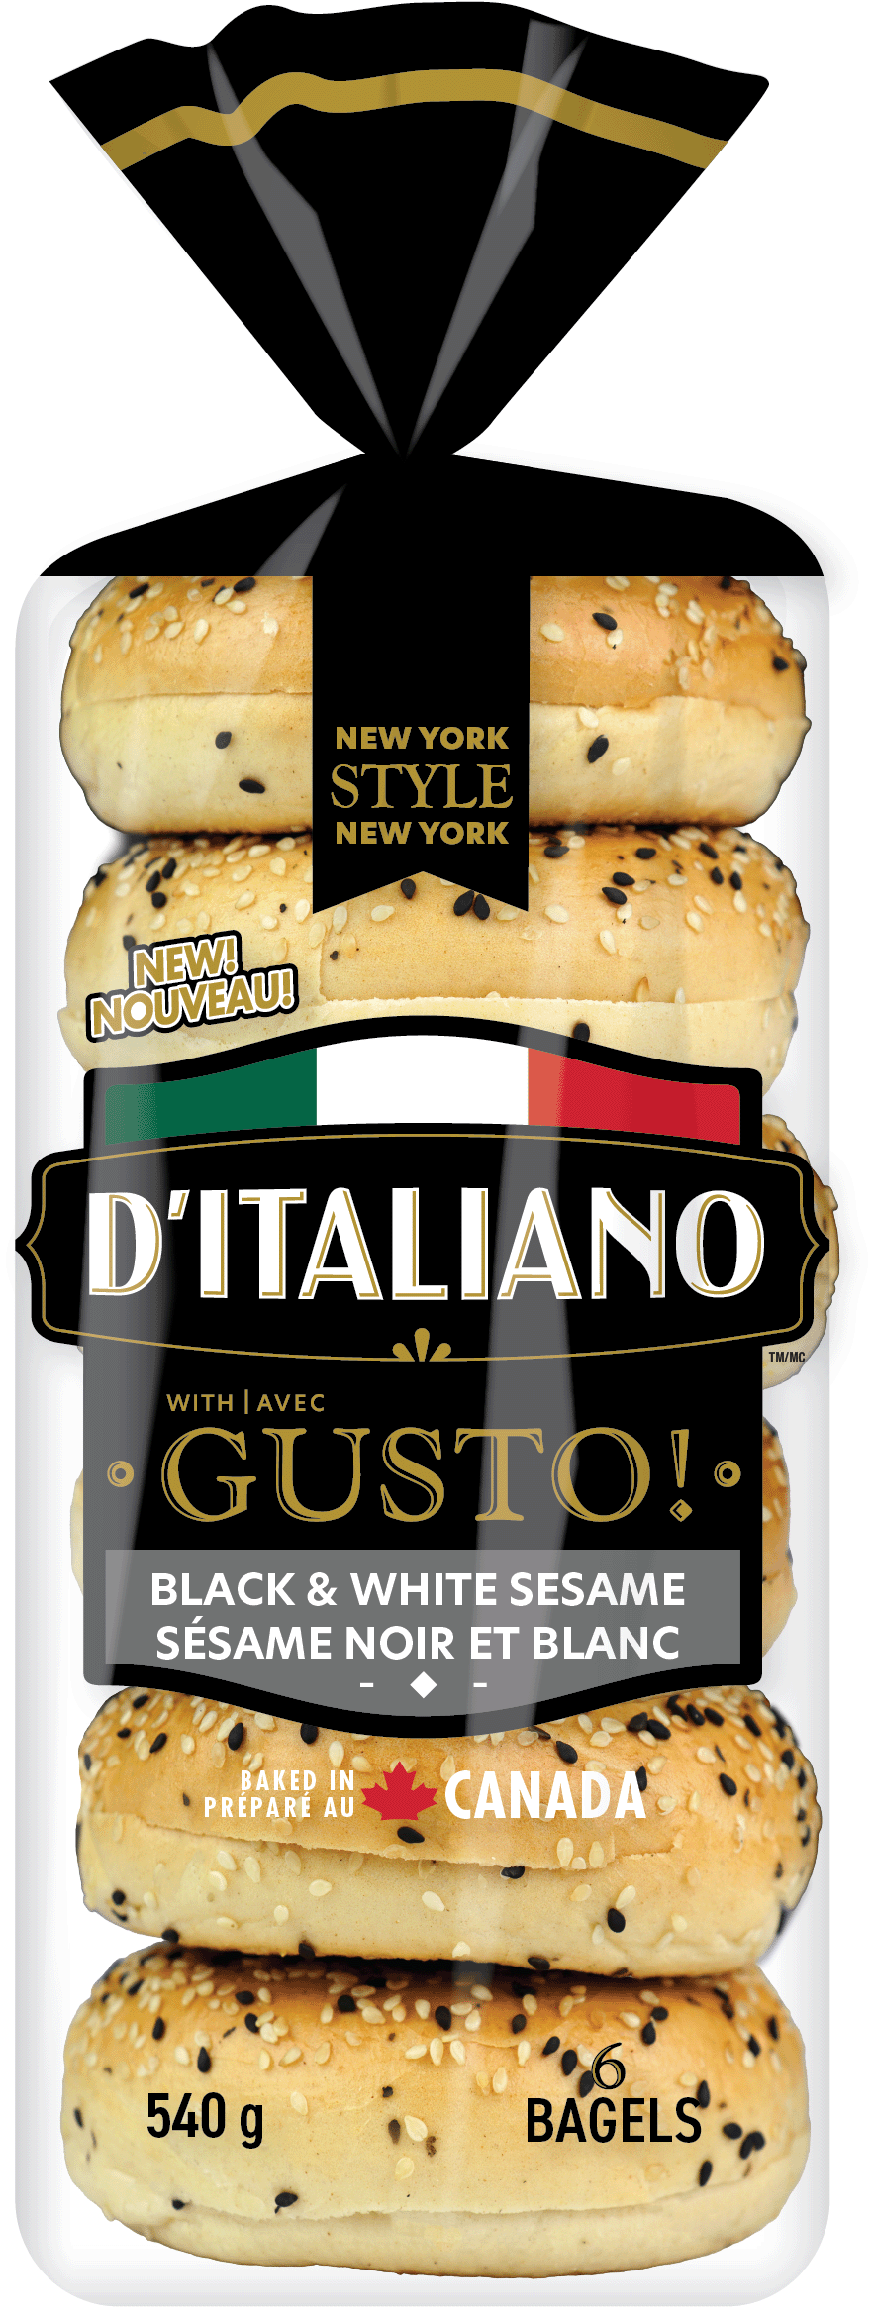 D’Italiano with Gusto!™ Black & White Sesame Bagel